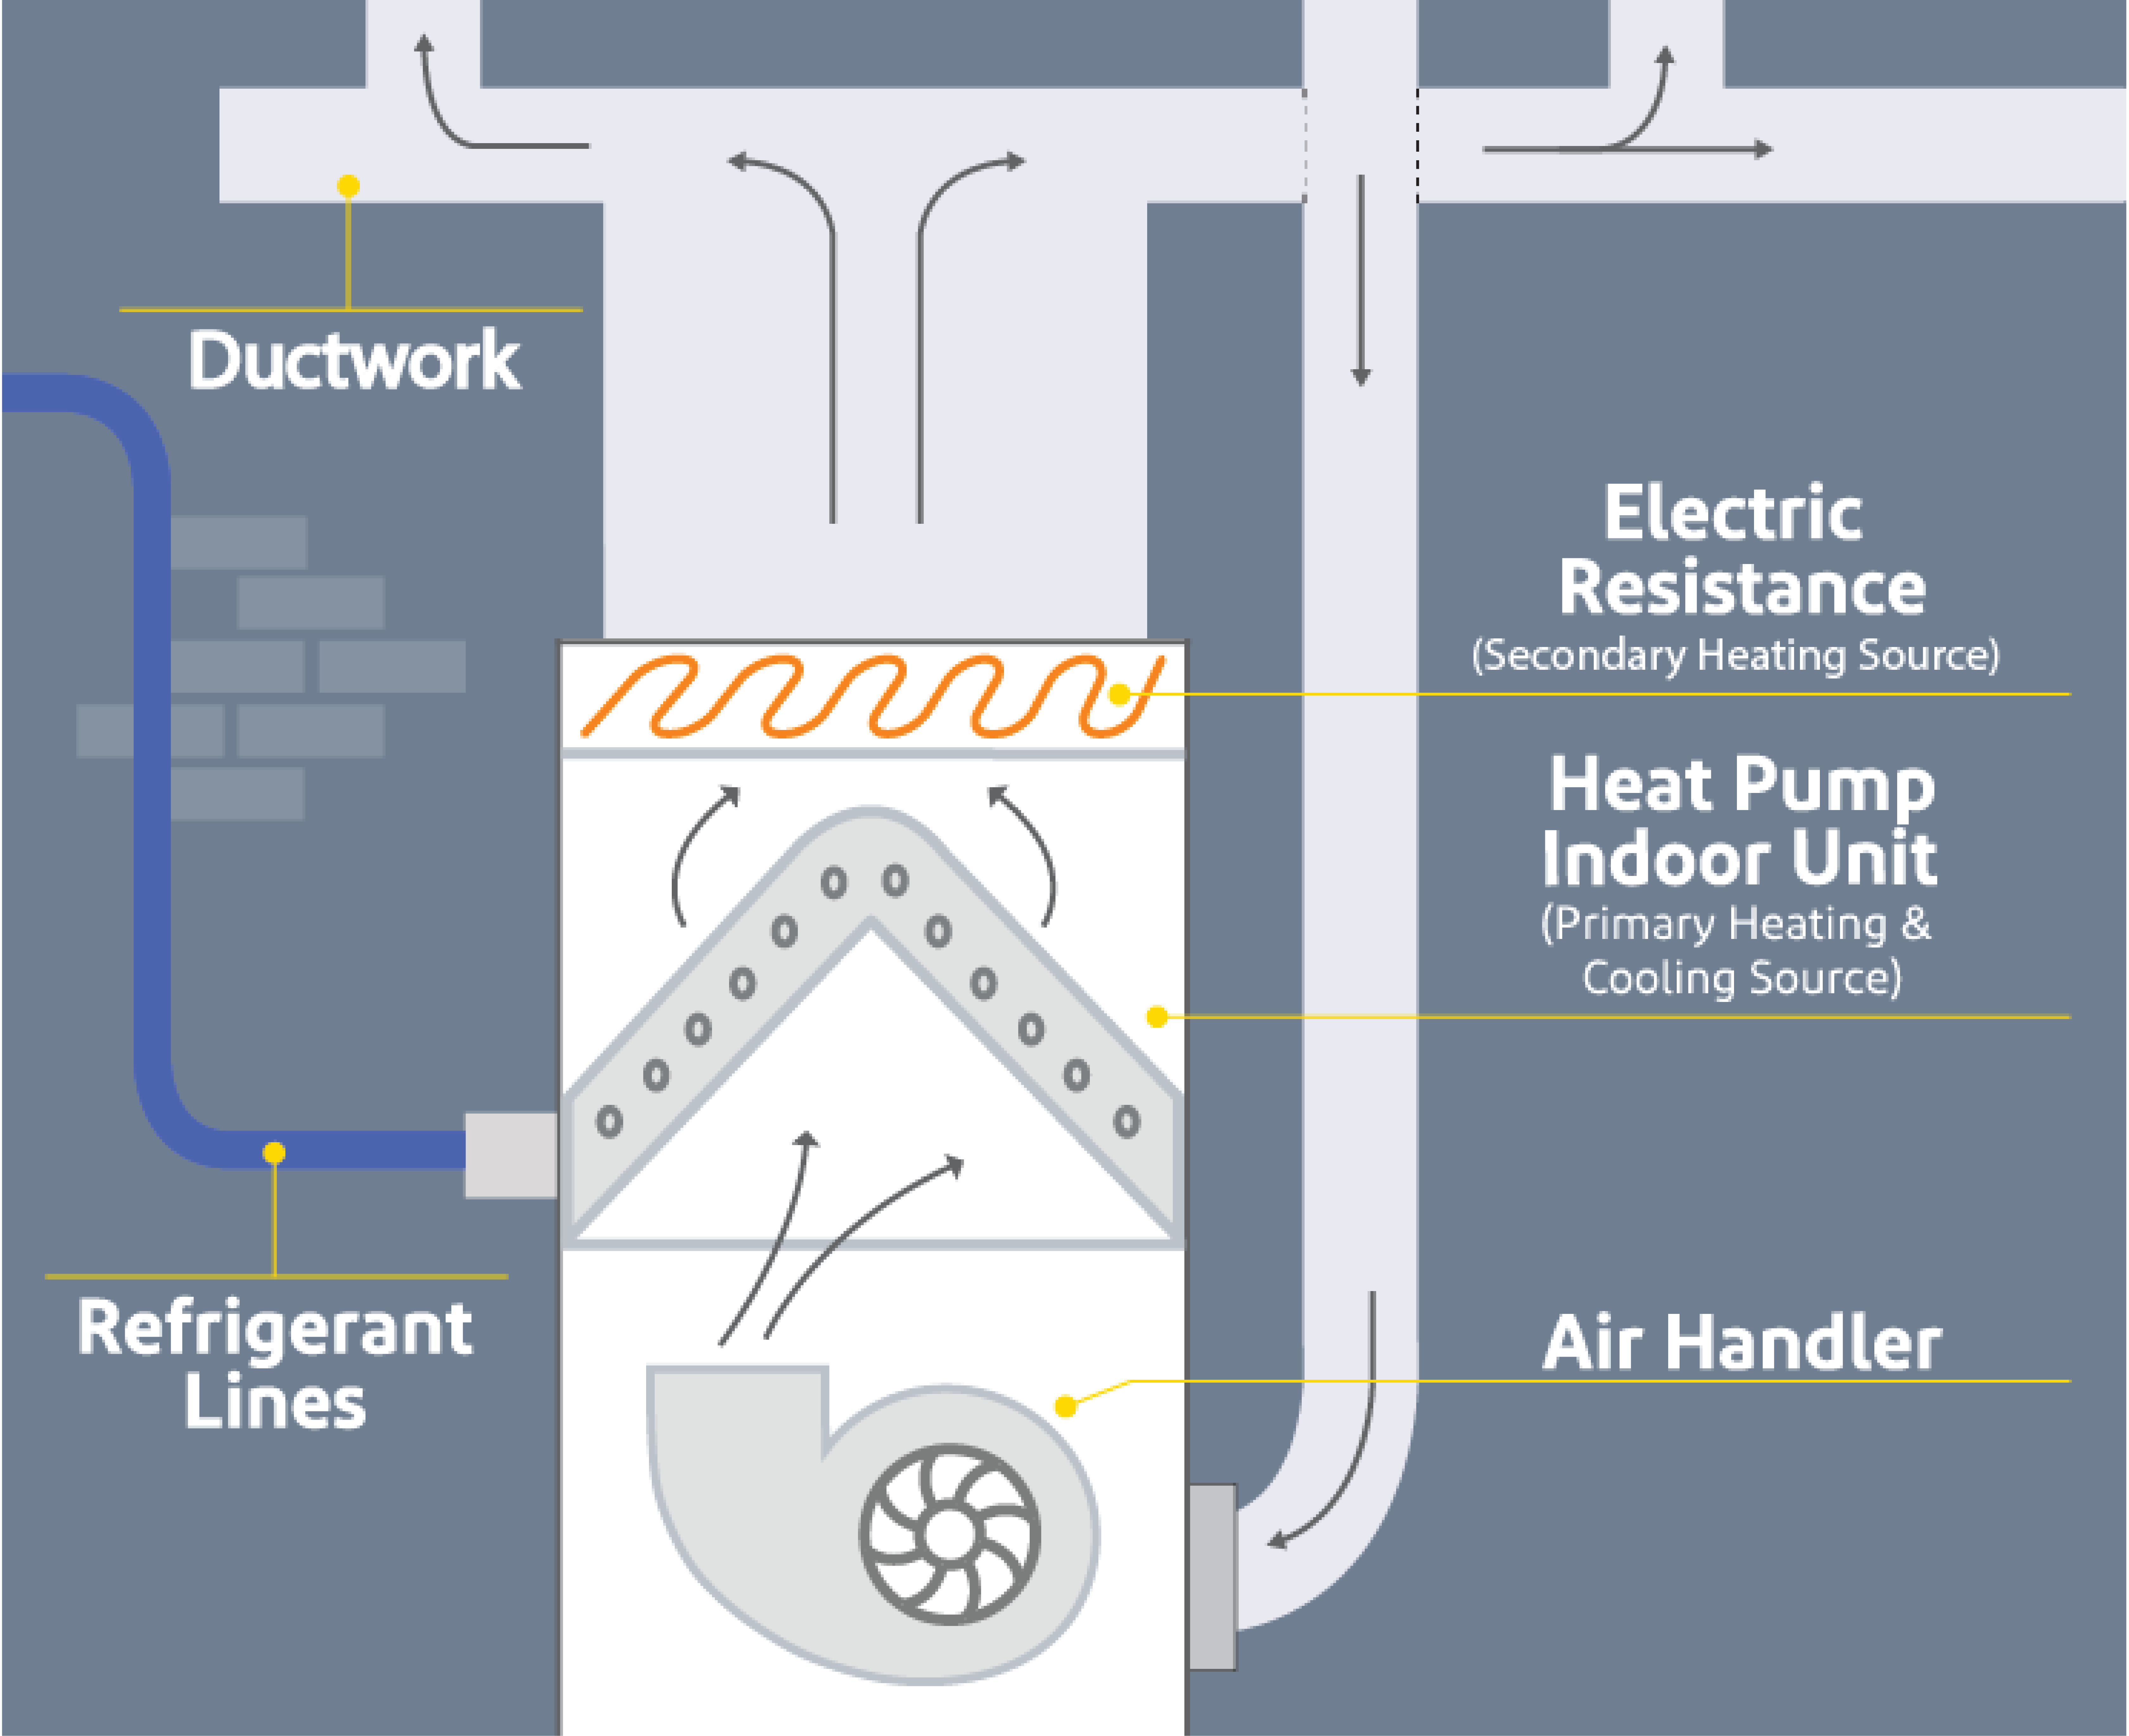 A graphic explaining how All-electric heat pump systems work.